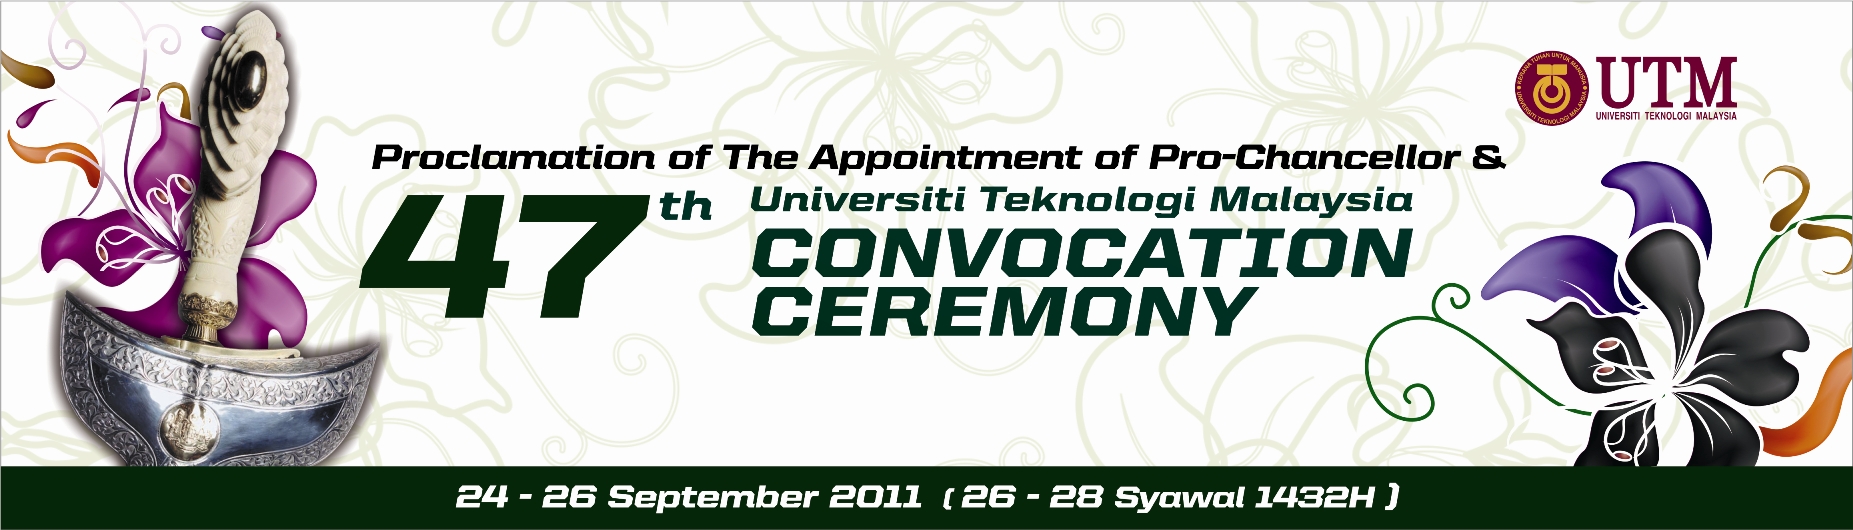 Proclamation of The Appointment of Pro-Chancellor & Convocation Ceremony 47th